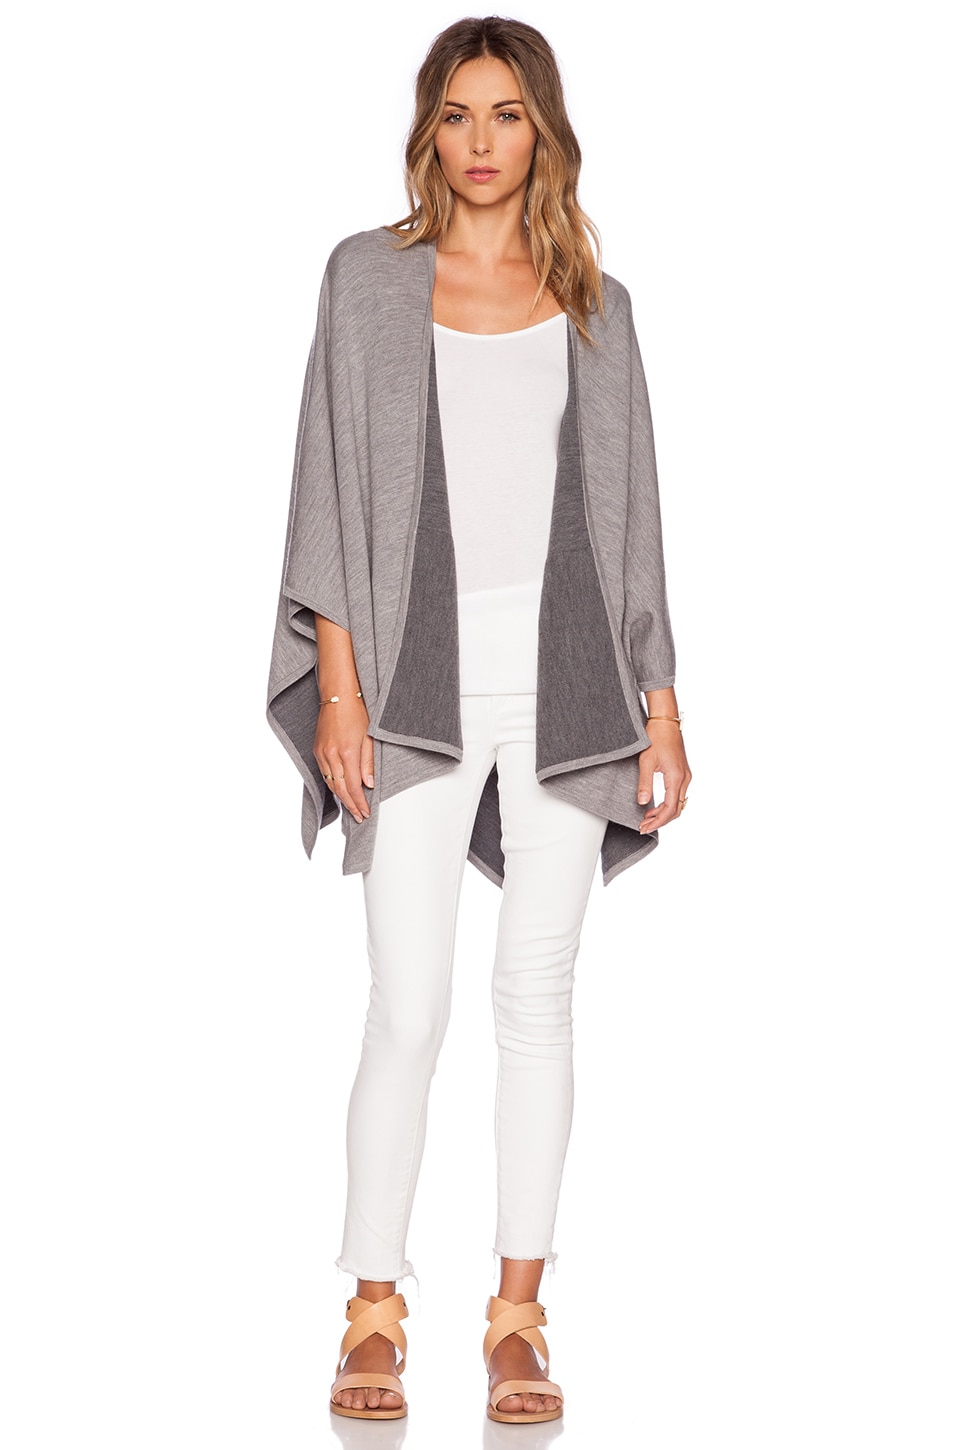 Vince Double Face Poncho in Heather Grey Combo | REVOLVE